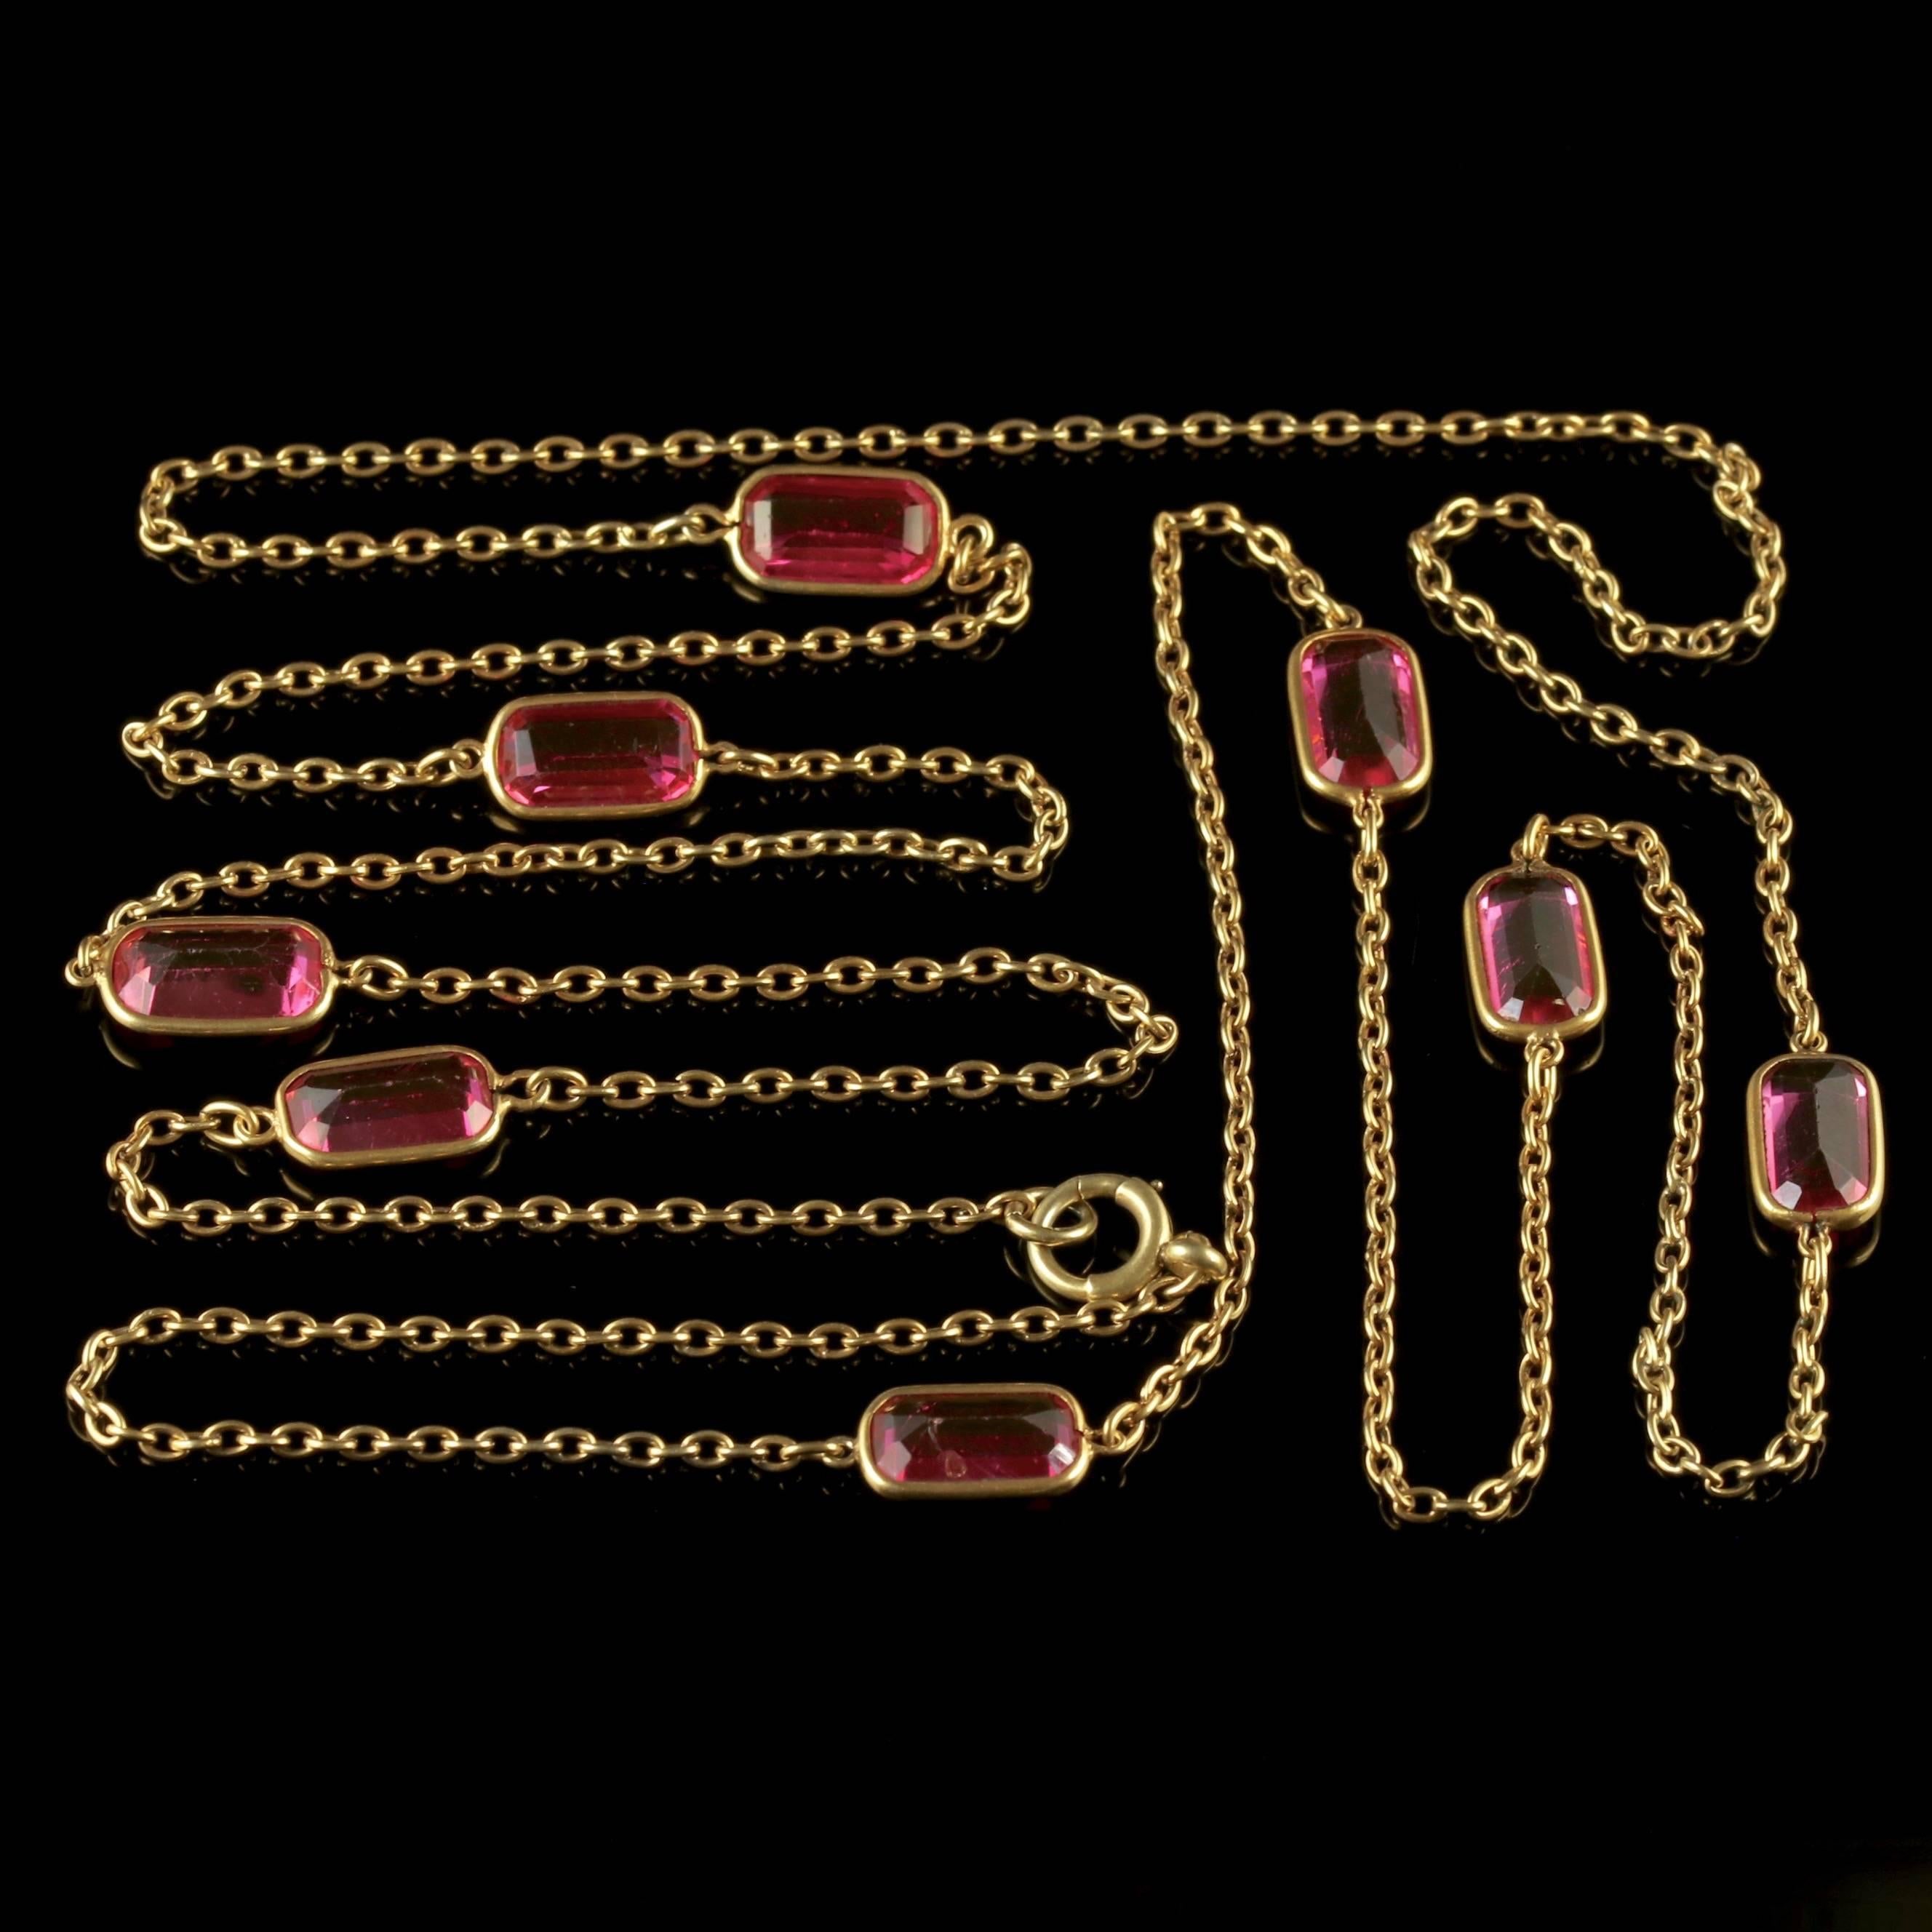 To read more please click continue reading below-

This fabulous long antique Victorian pink Paste Guard chain is Victorian, Circa 1900. 

The chain is long and beautifully made, displaying lovely Pink Paste Stones running down the length of the